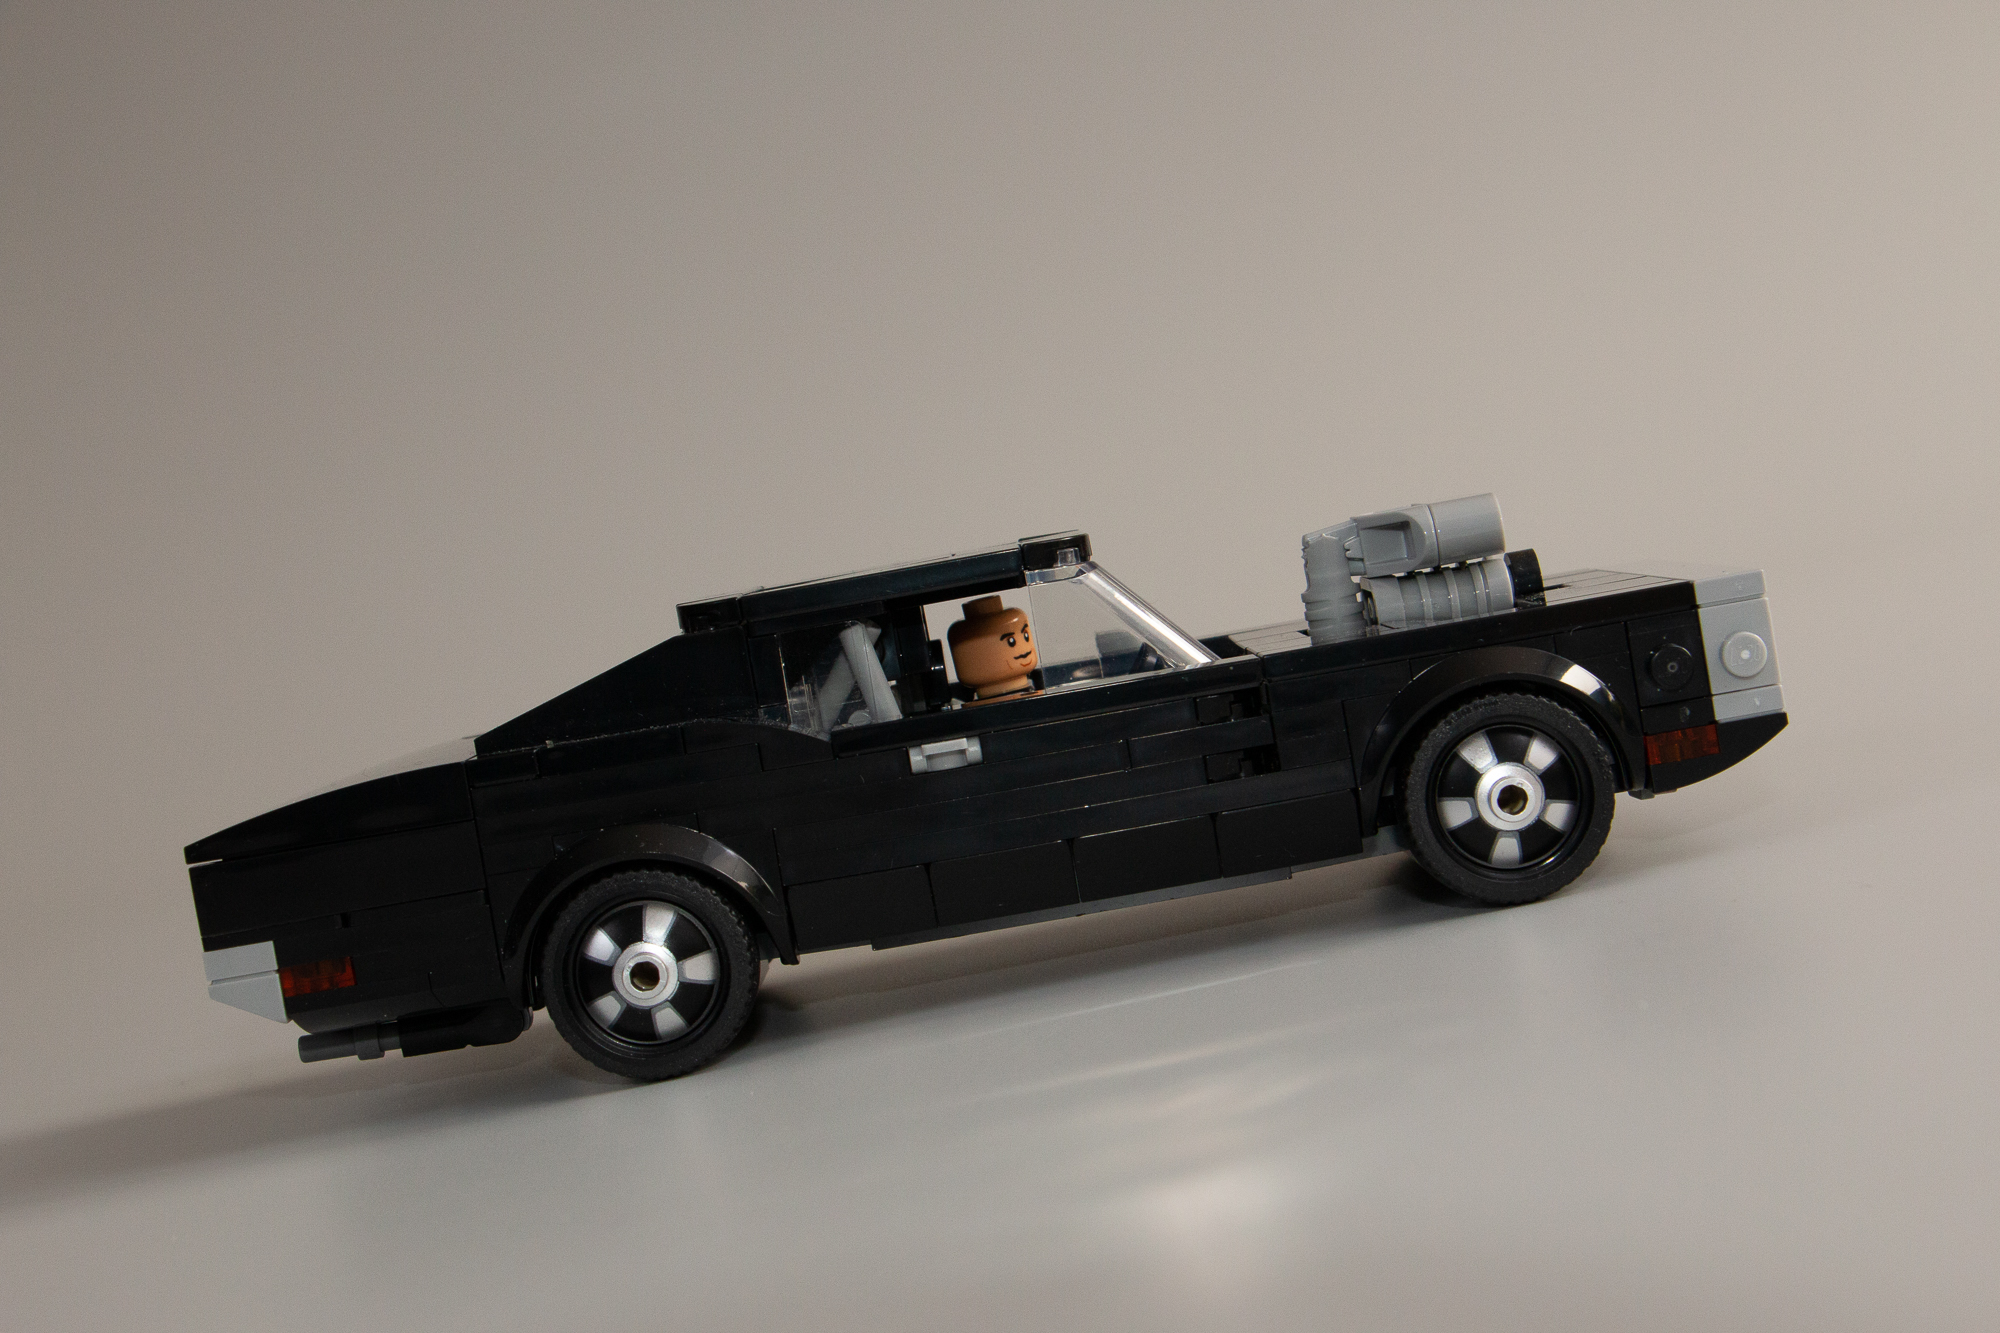 LEGO 76912 Fast and Furious 1970 Dodge Charger R/T review